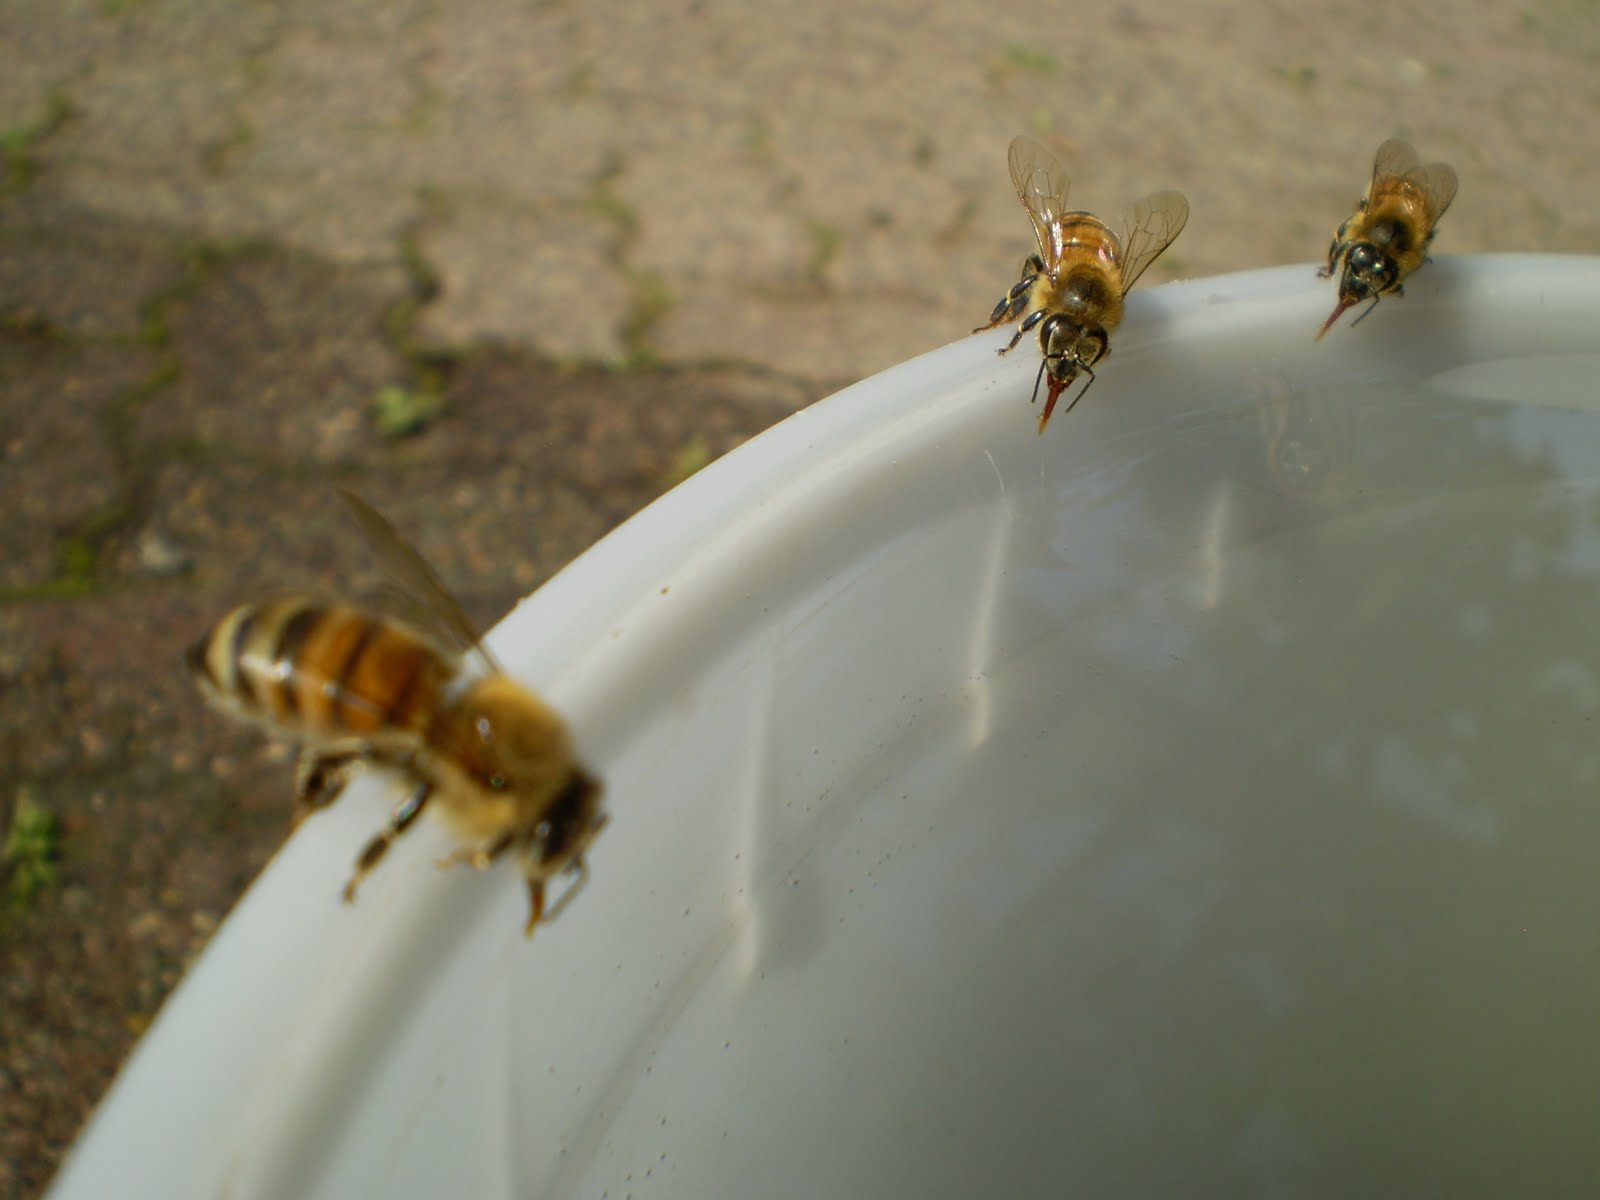 Bees of Stoney Creek: Bees Drink Water